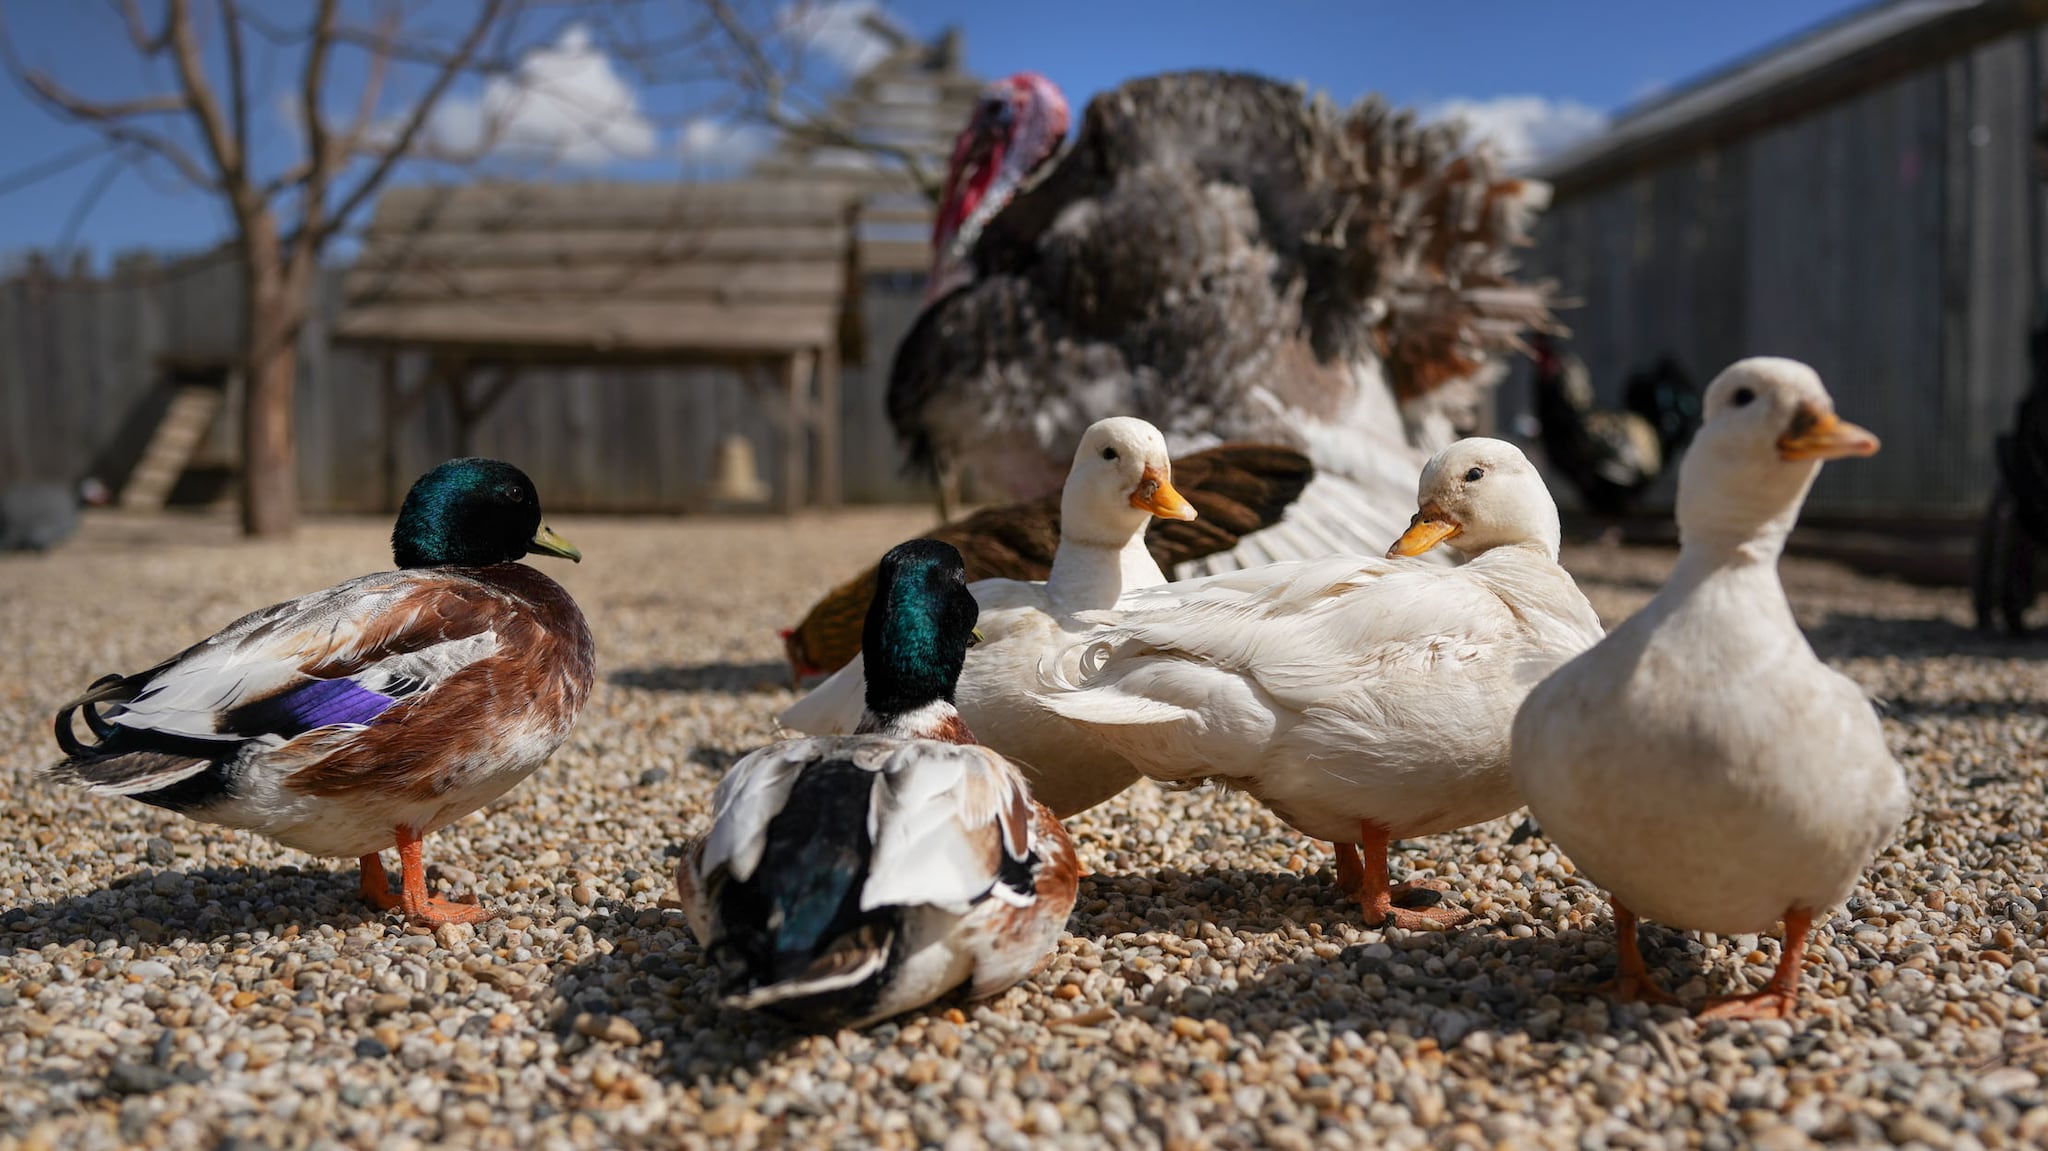 A picture of ducks and a turkey on a farm